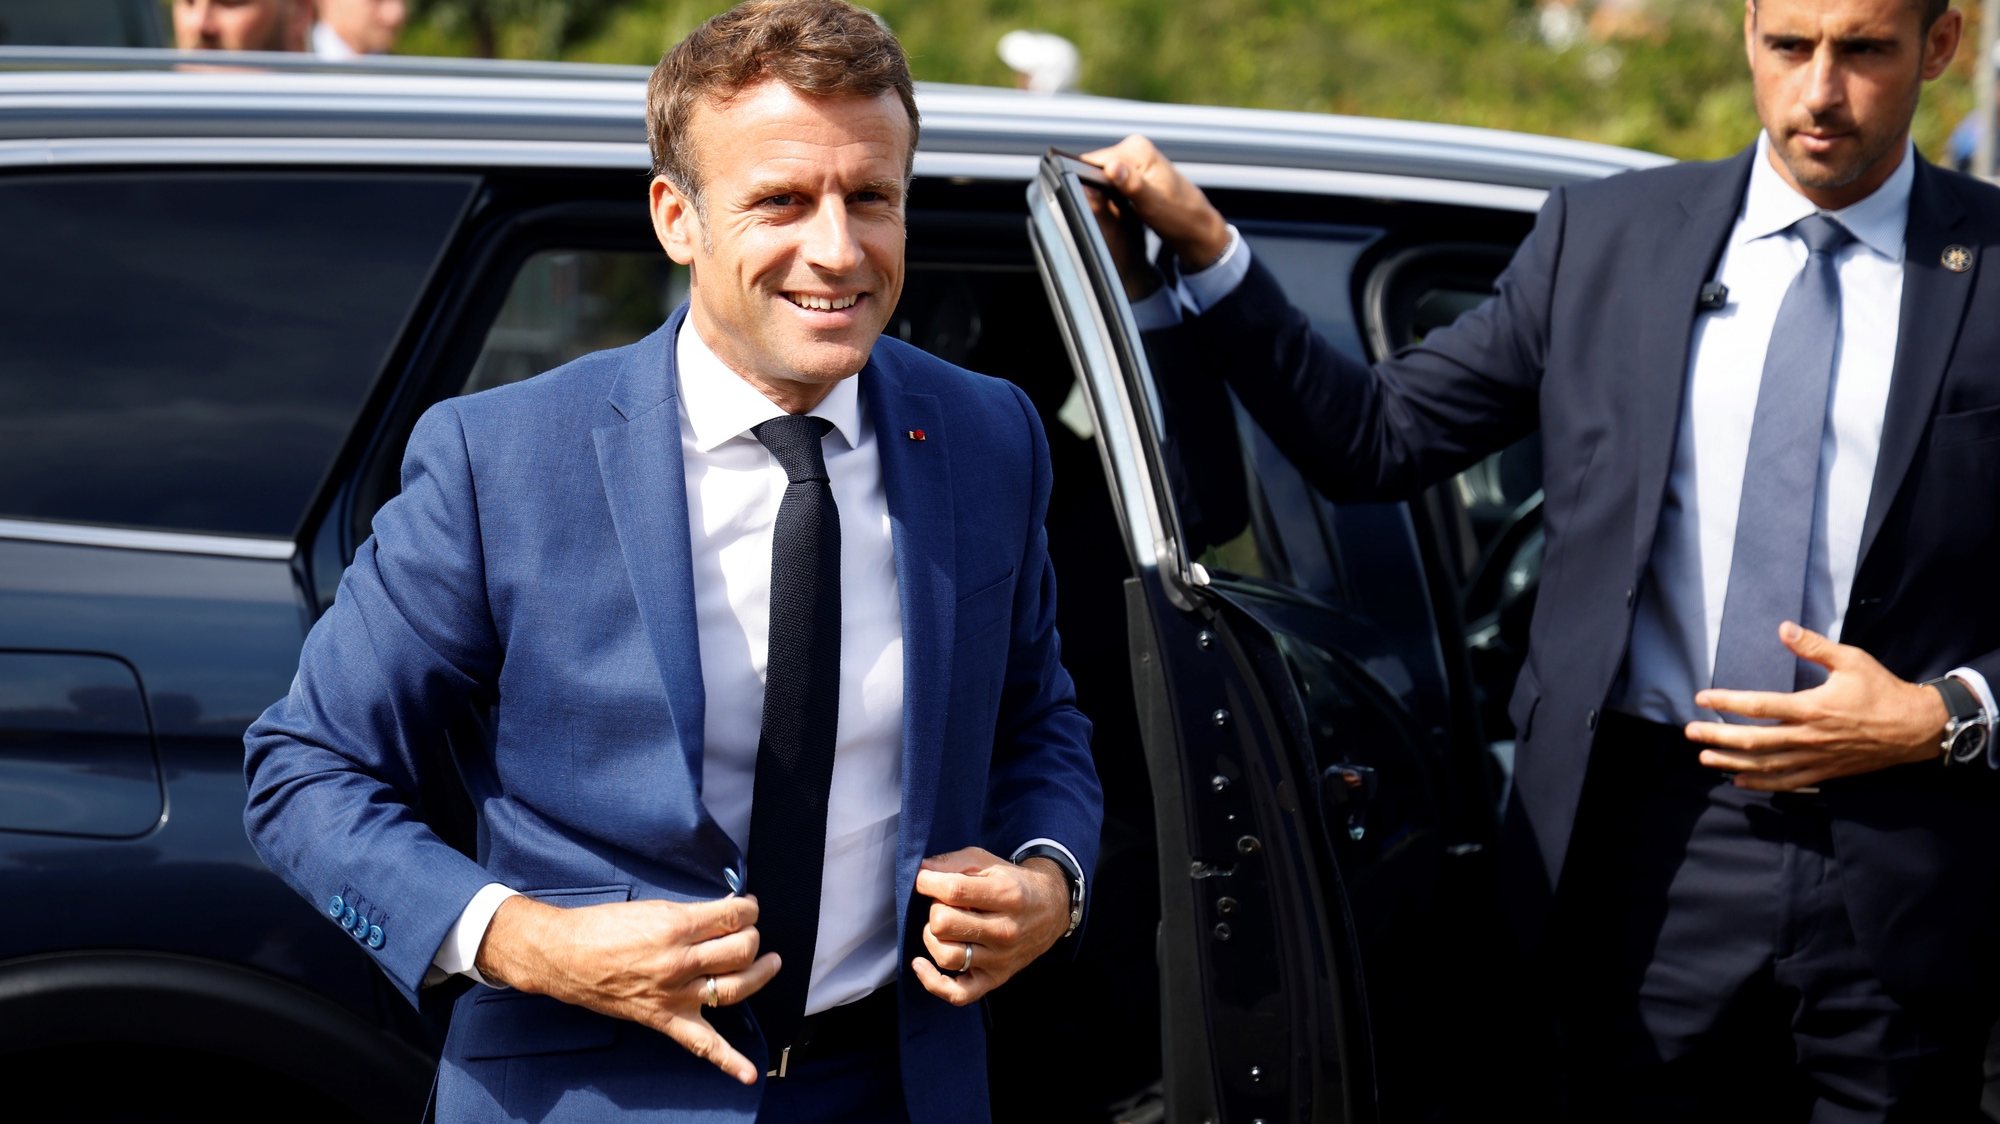 epa10181229 French President Emmanuel Macron arrives to meet students of the Eric Tabarly high school in Les Sables-d&#039;Olonne, western France, 13 September 2022. Macron arrived at Eric Tabarly vocational school to promote his agenda on how to improve vocational high schools and make it more attractive.  EPA/LUDOVIC MARIN / POOL  MAXPPP OUT